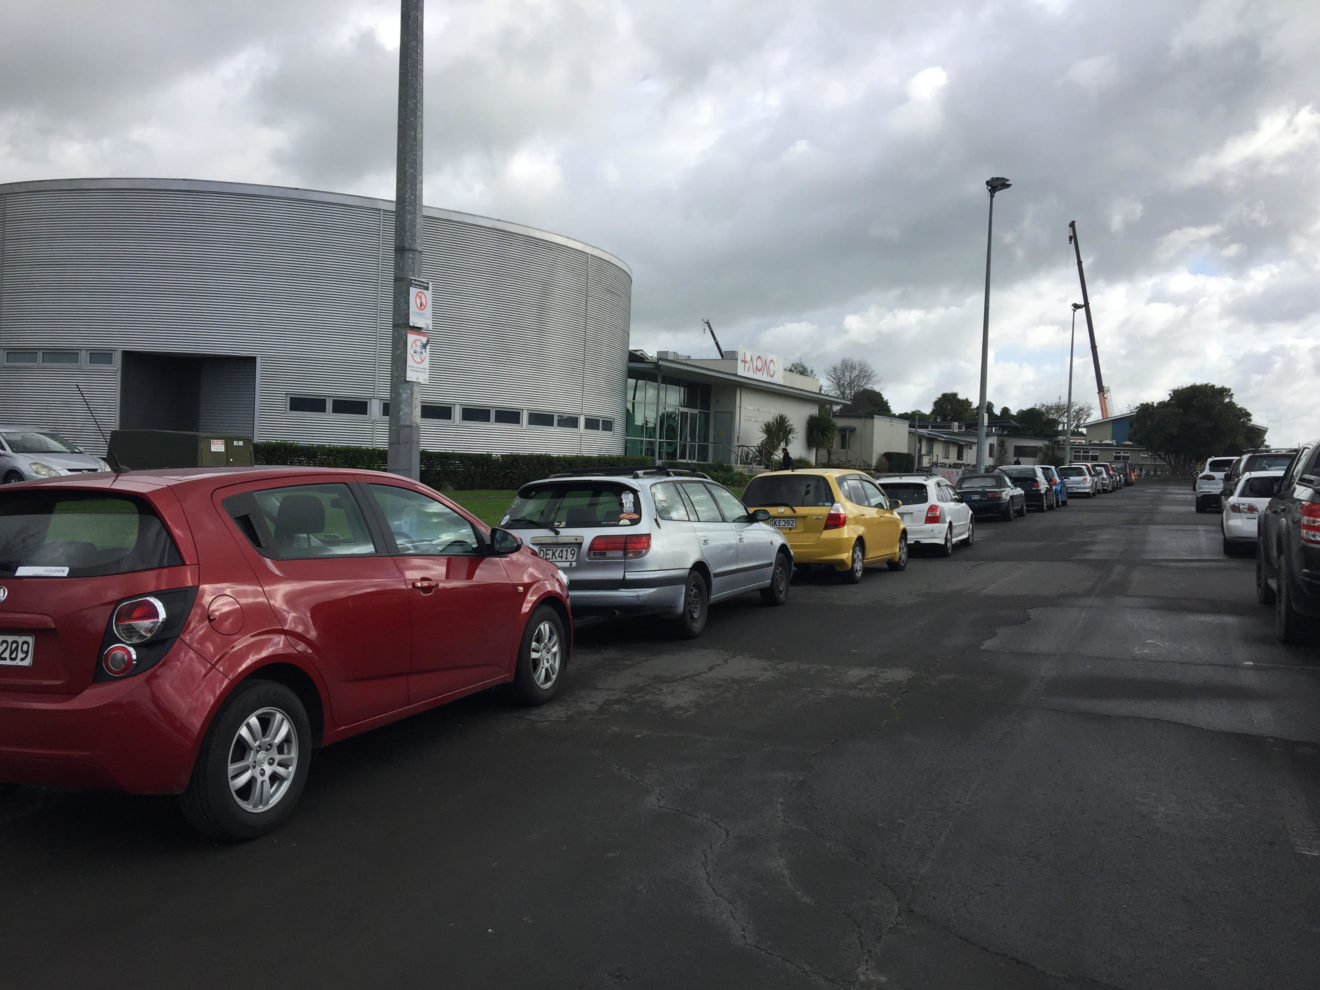 Carparking & Safety Concerns at WSC/NPOW